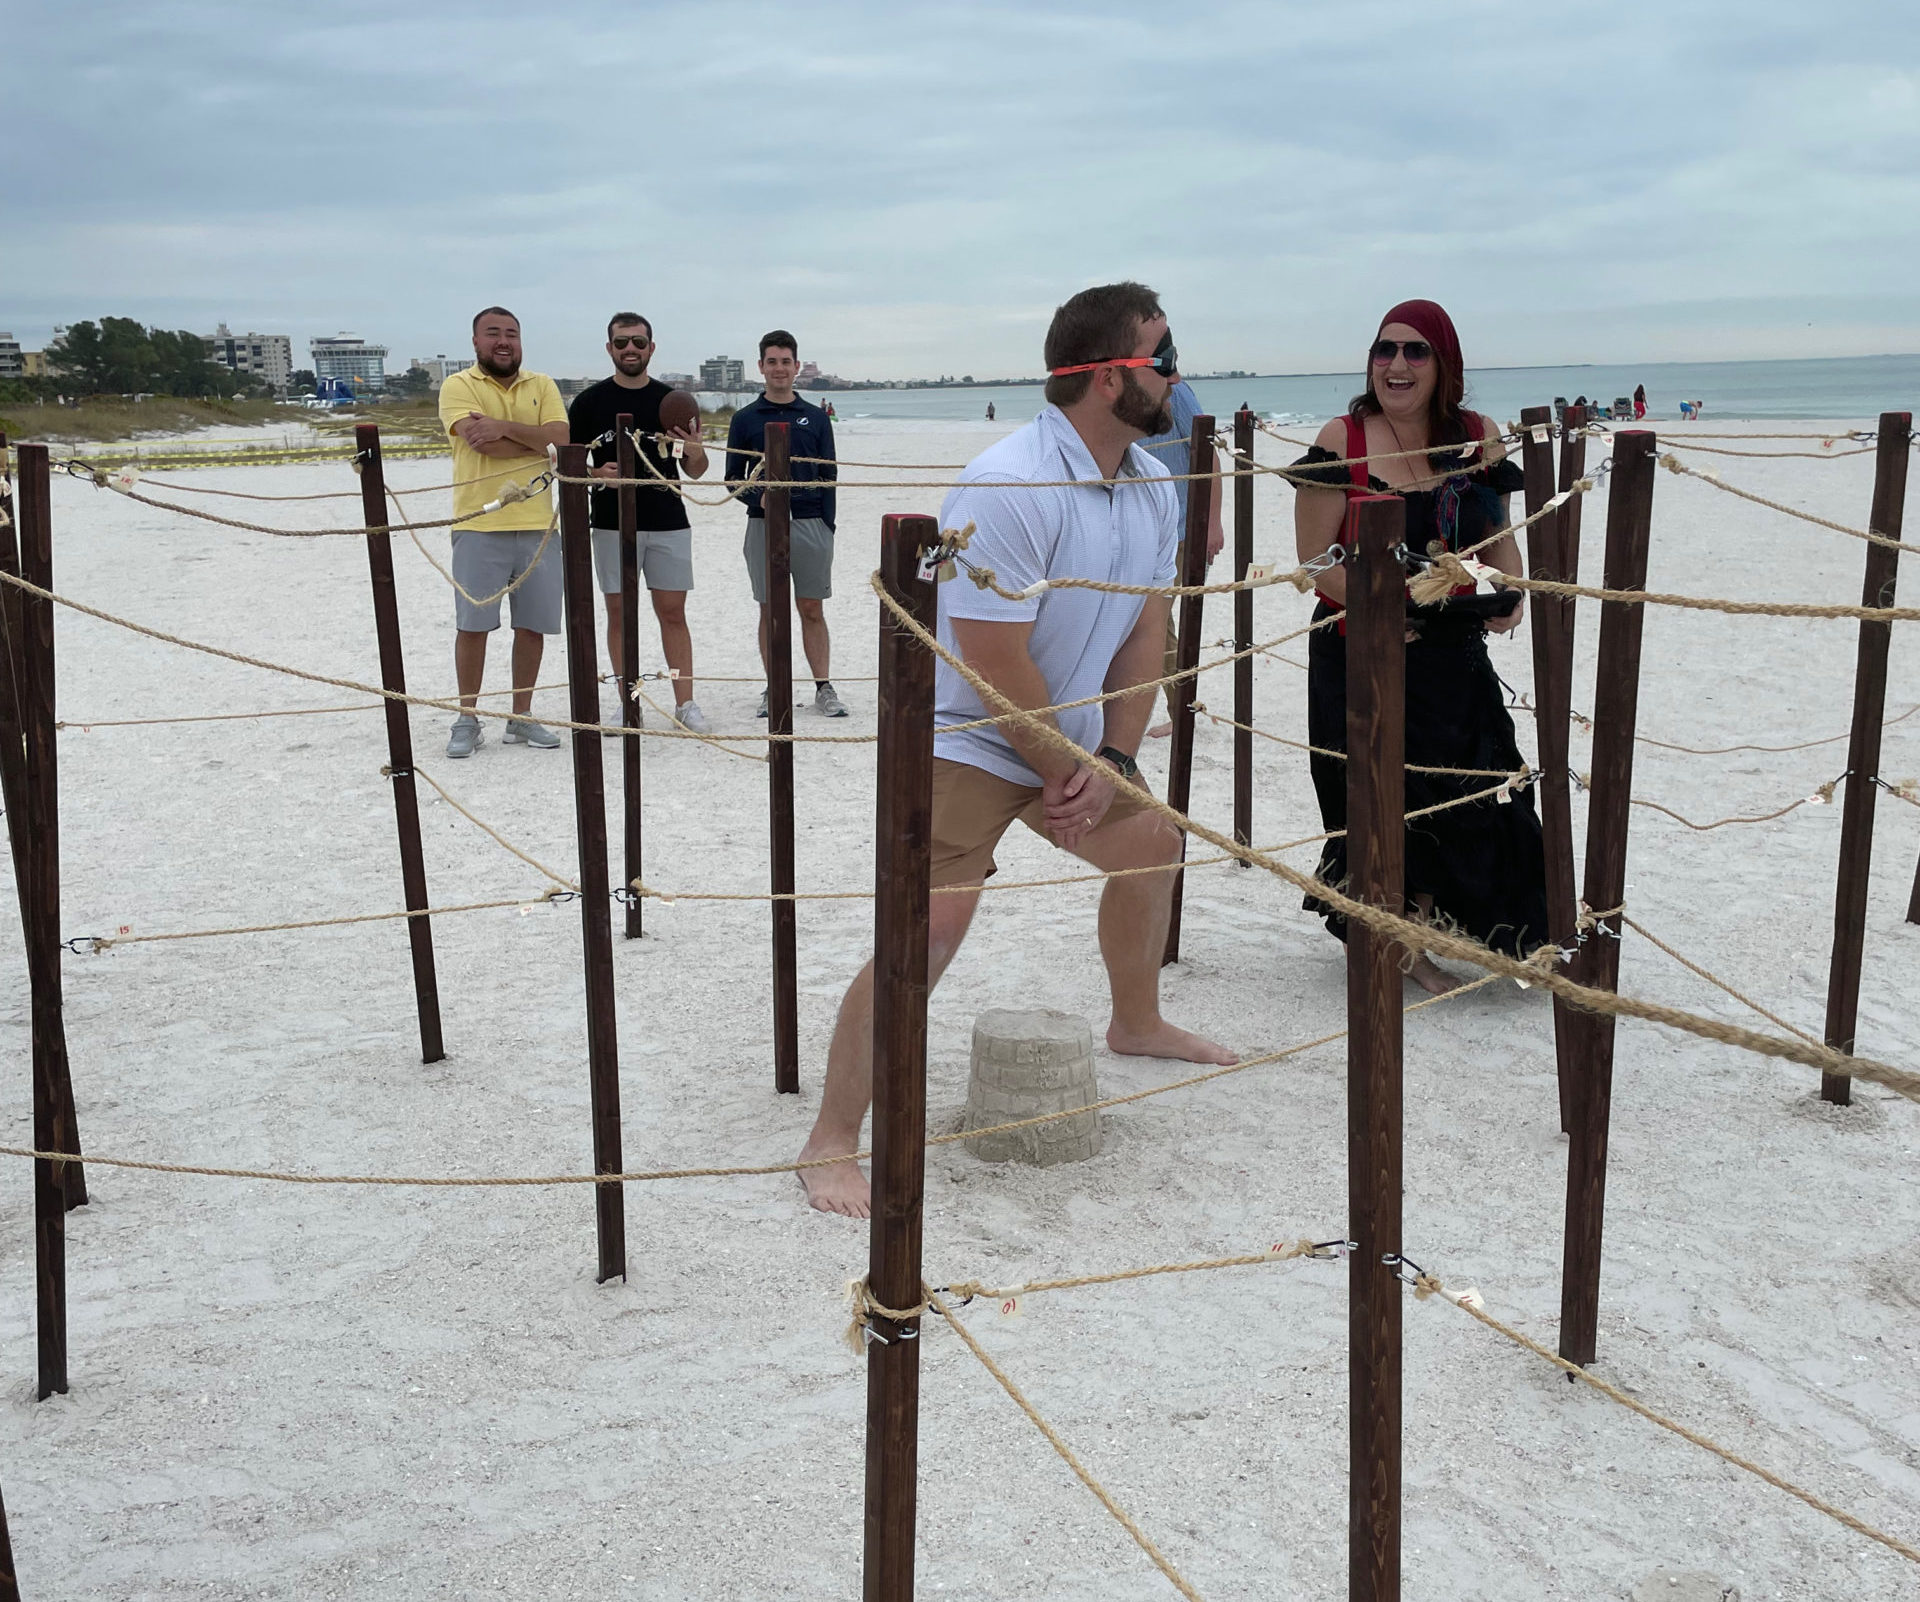 A blindfolded man walking through a rope maze takes a big step over a sandcastle. A woman in a pirate costume with an iPad for scorekeeping looks on.